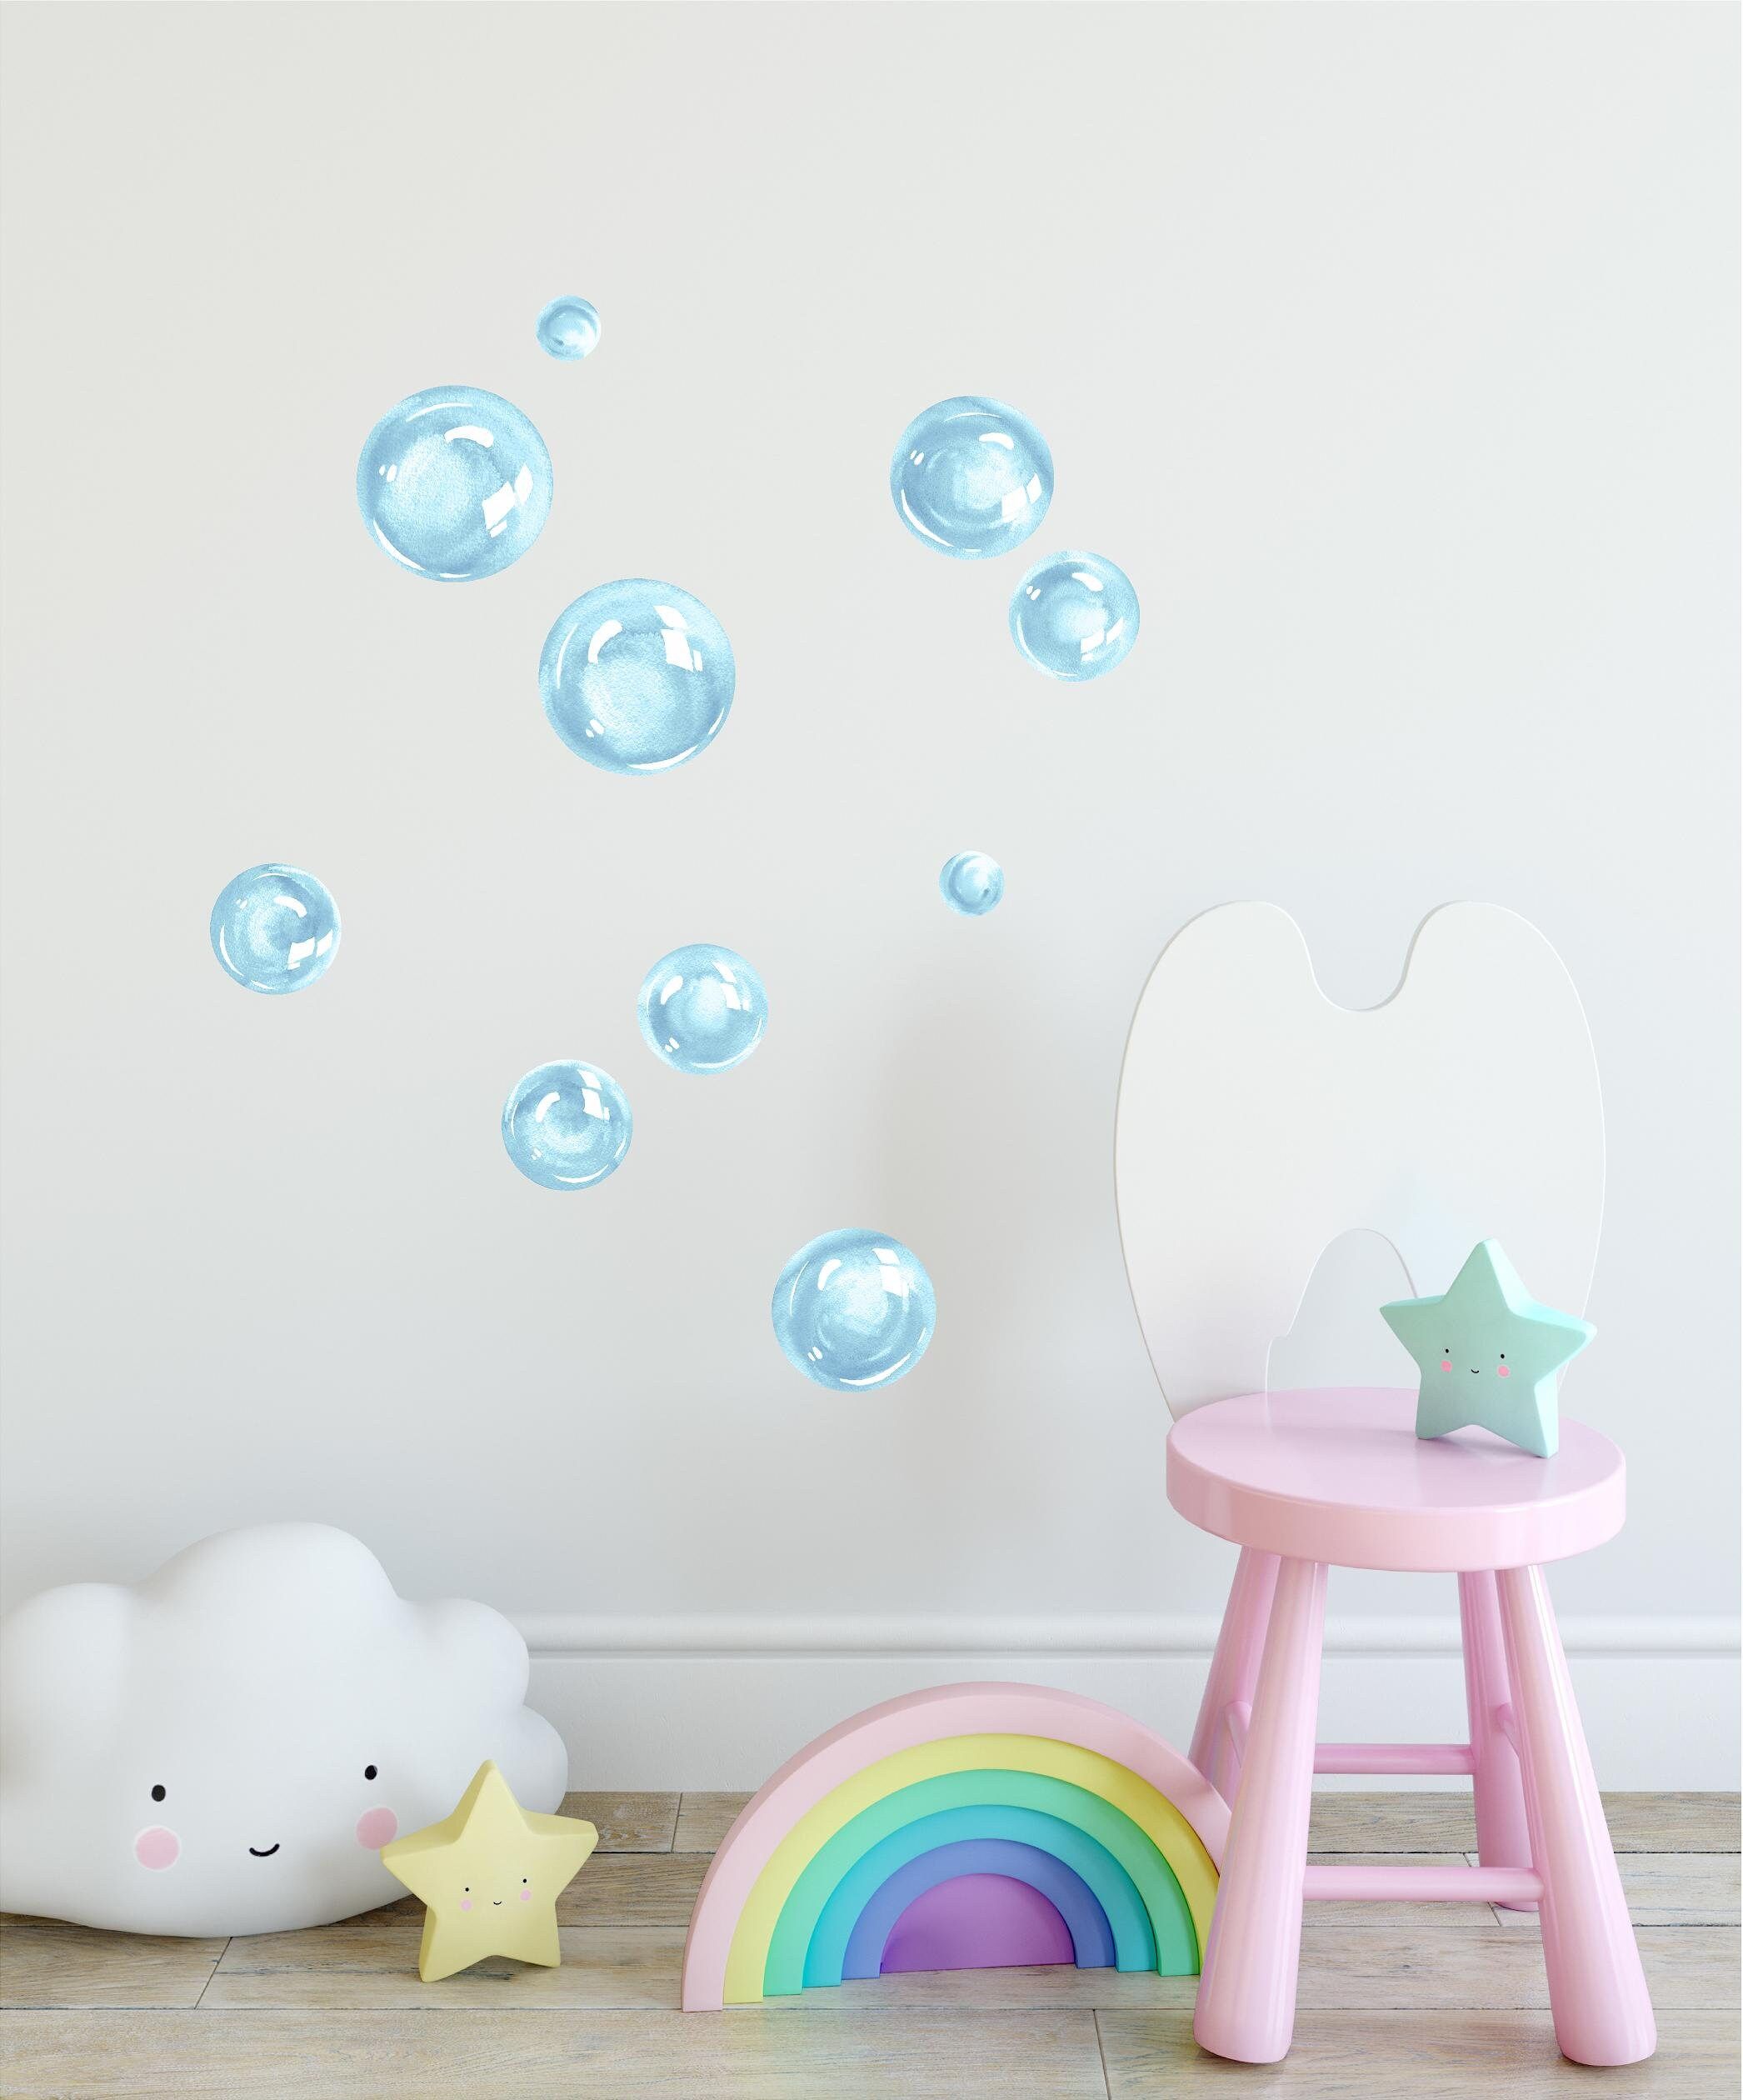 Watercolor Blue Bubbles Wall Decal Set Ocean Sea Bubble Fabric – Etsy Pertaining To Bubble Wall Art (View 5 of 15)